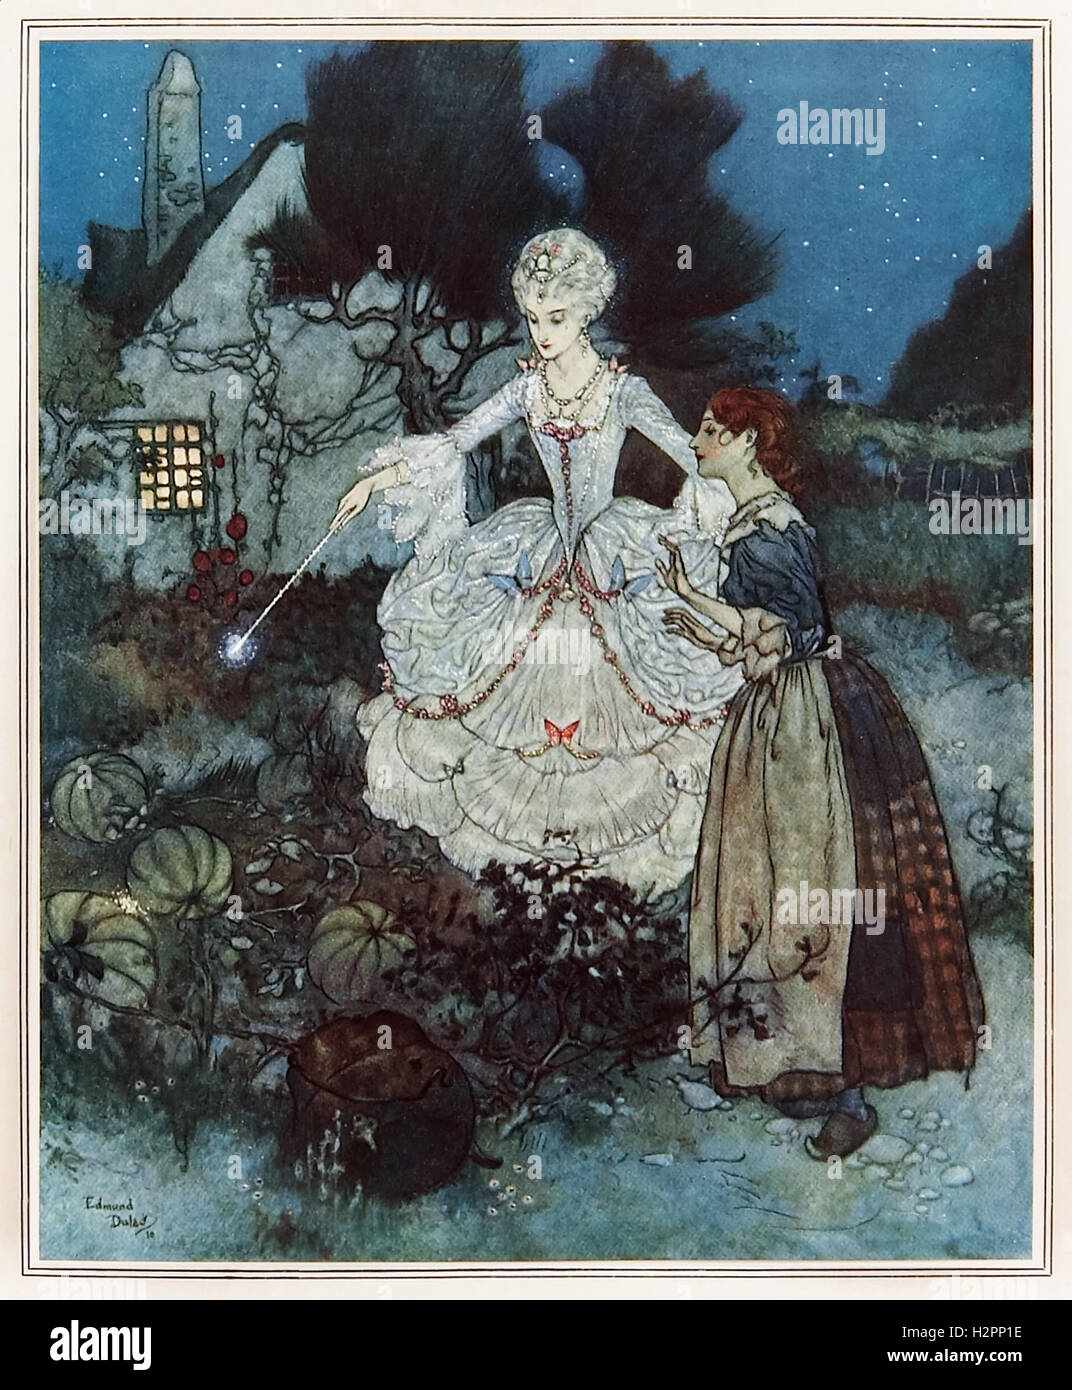 ‘And her godmother pointed to the finest of all with her wand.’ Illustration from ‘Cinderella’ by Edmund Dulac (1882-1953). The fairy godmother transforms a pumpkin into a carriage. See description for more information. Stock Photo